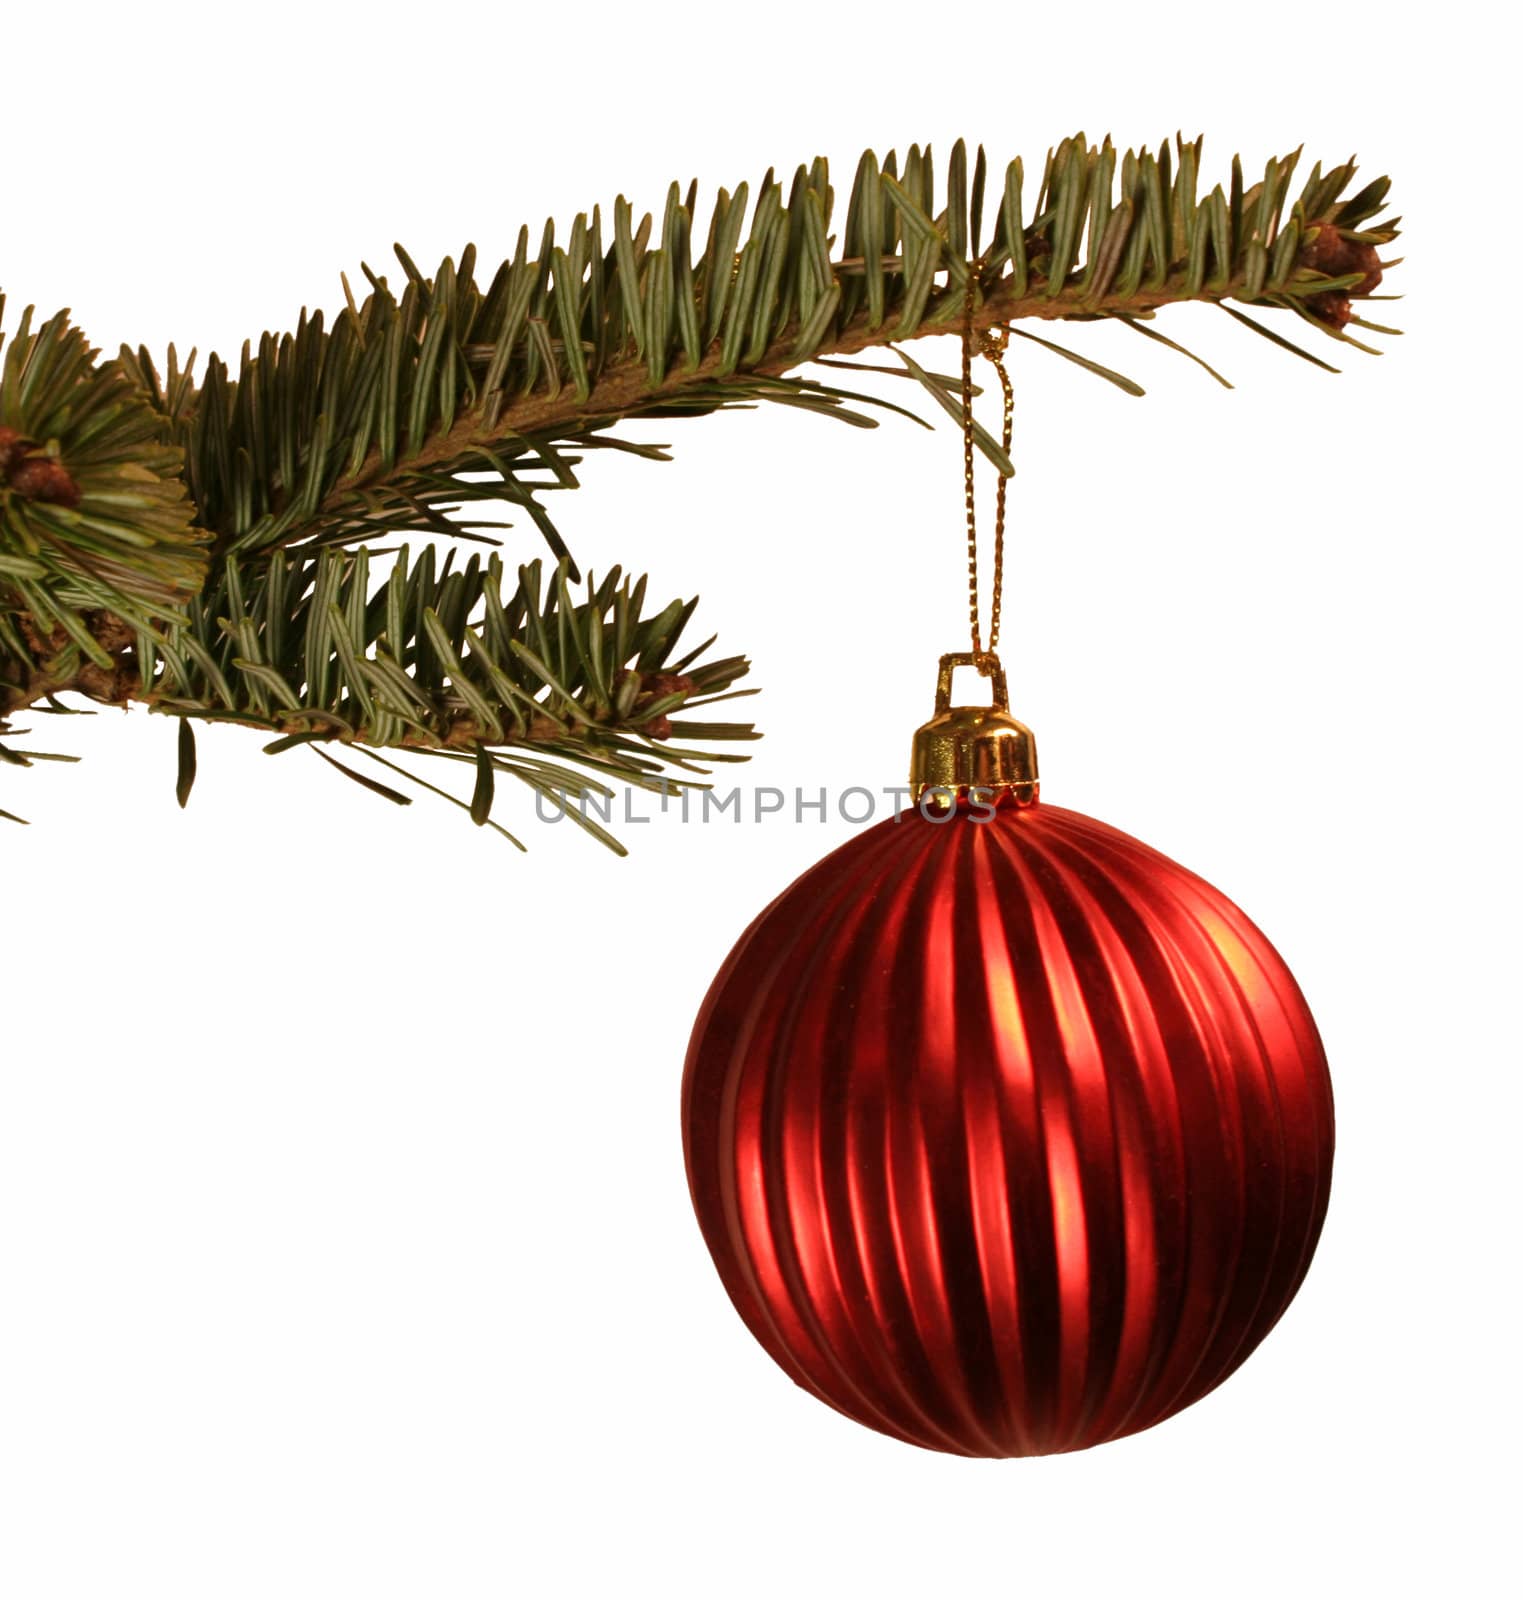 An isolated red christmas ball ornament hanging from a spruce branch.